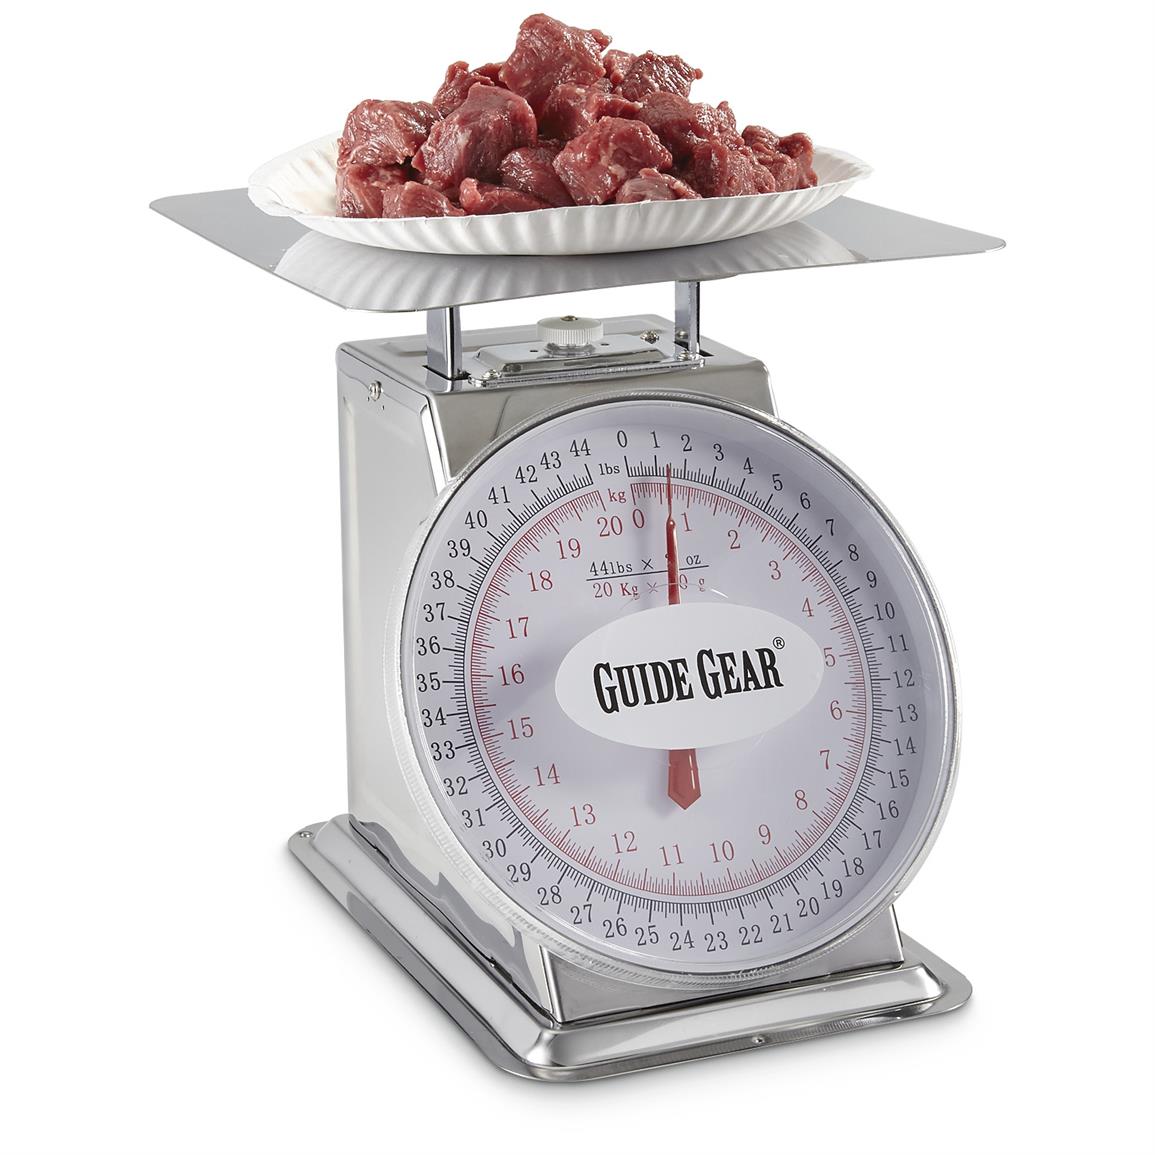 Guide Gear Stainless Steel Kitchen Food Scale, 44 lb.